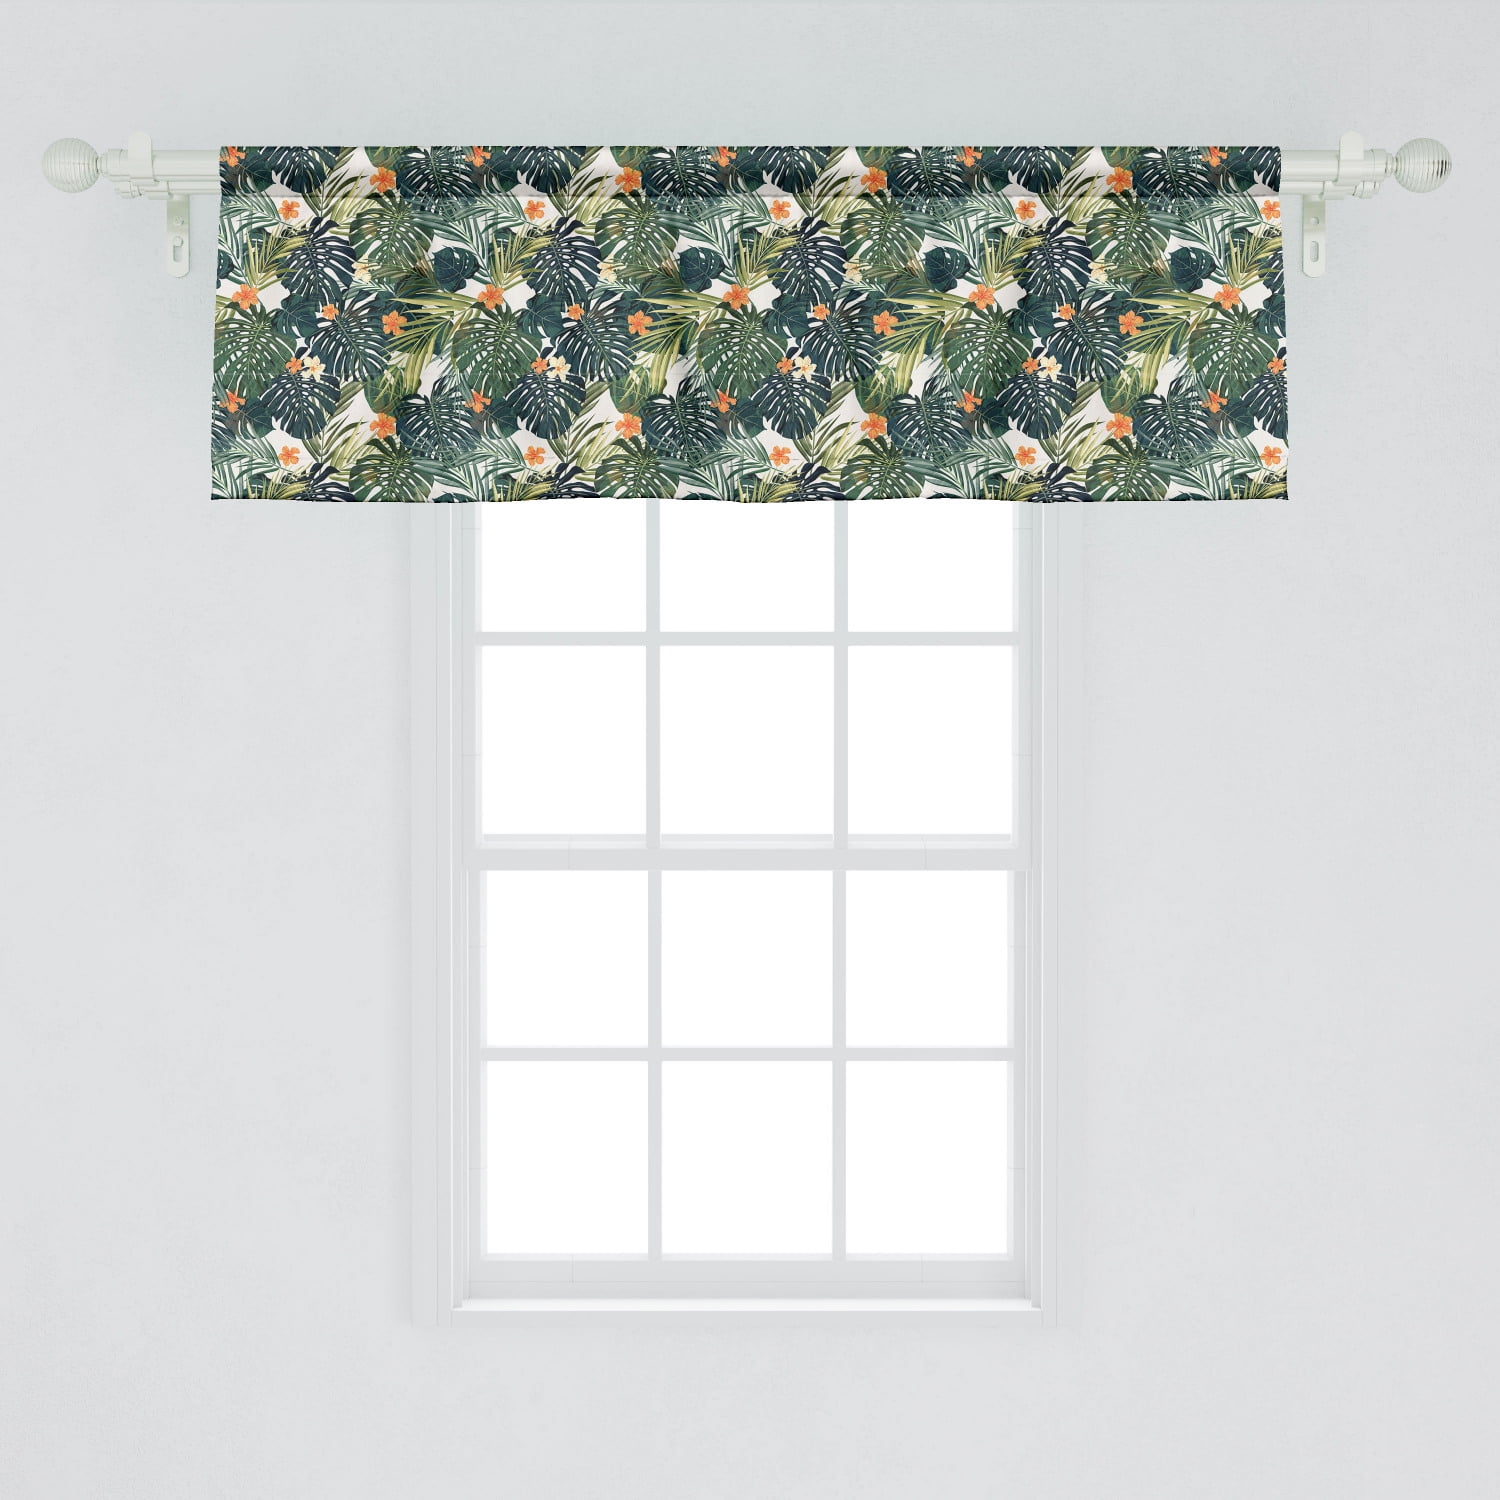 NEW CONTEMPORARY Florals Flower Palm Tree Tropical Valance Curtain 52”W x 13"L 